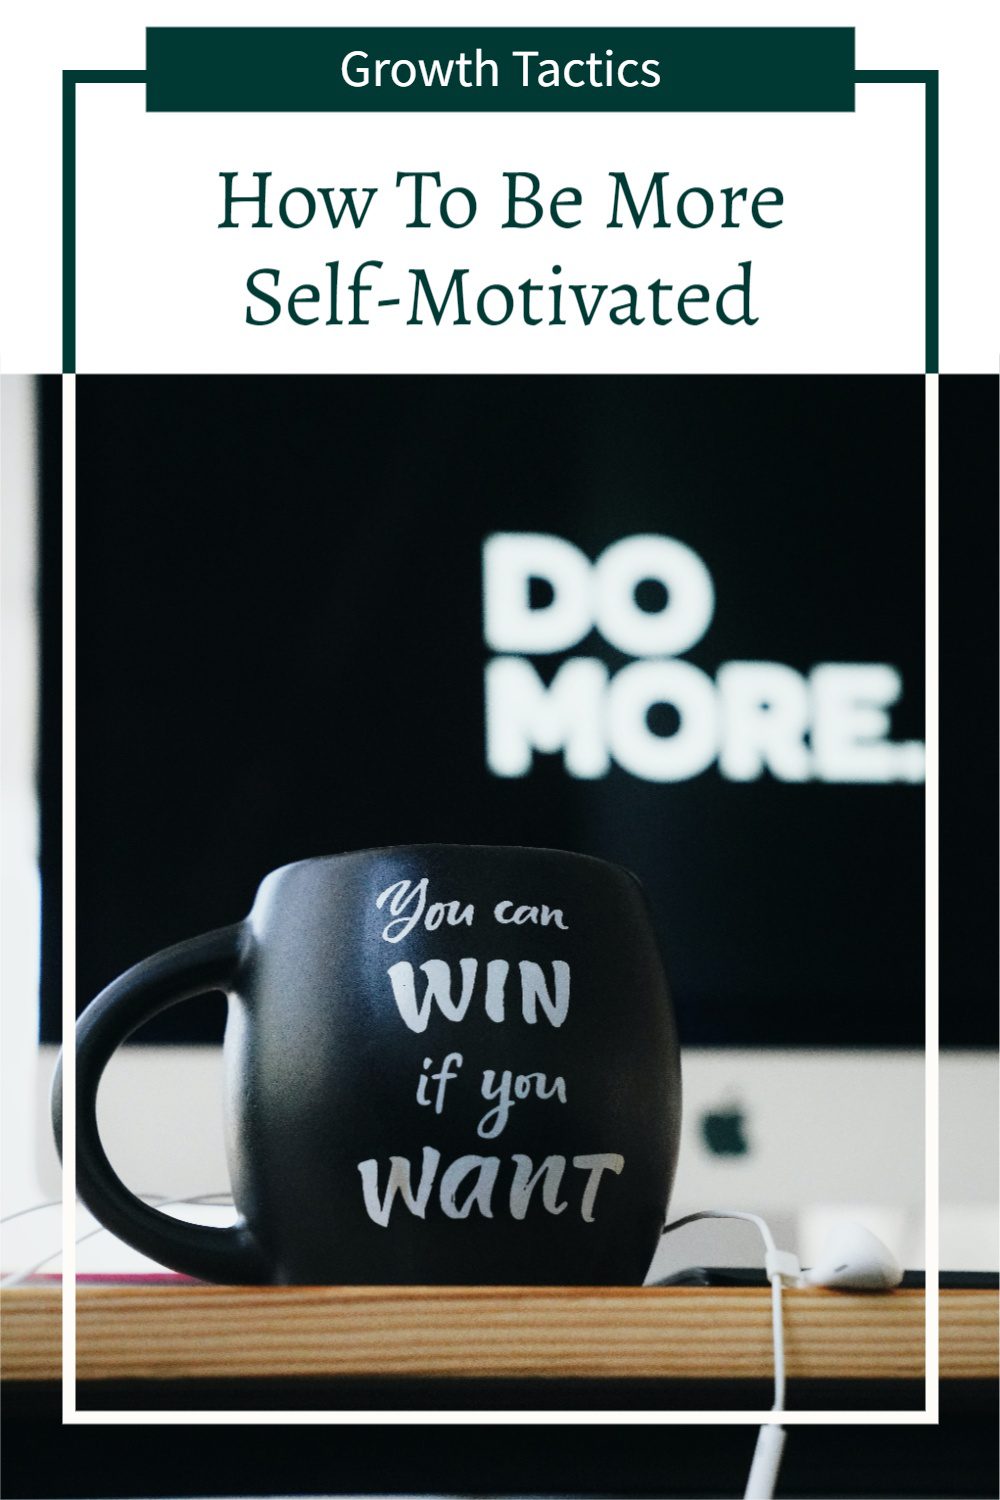 How To Be More Self-Motivated and Achieve Greater Success